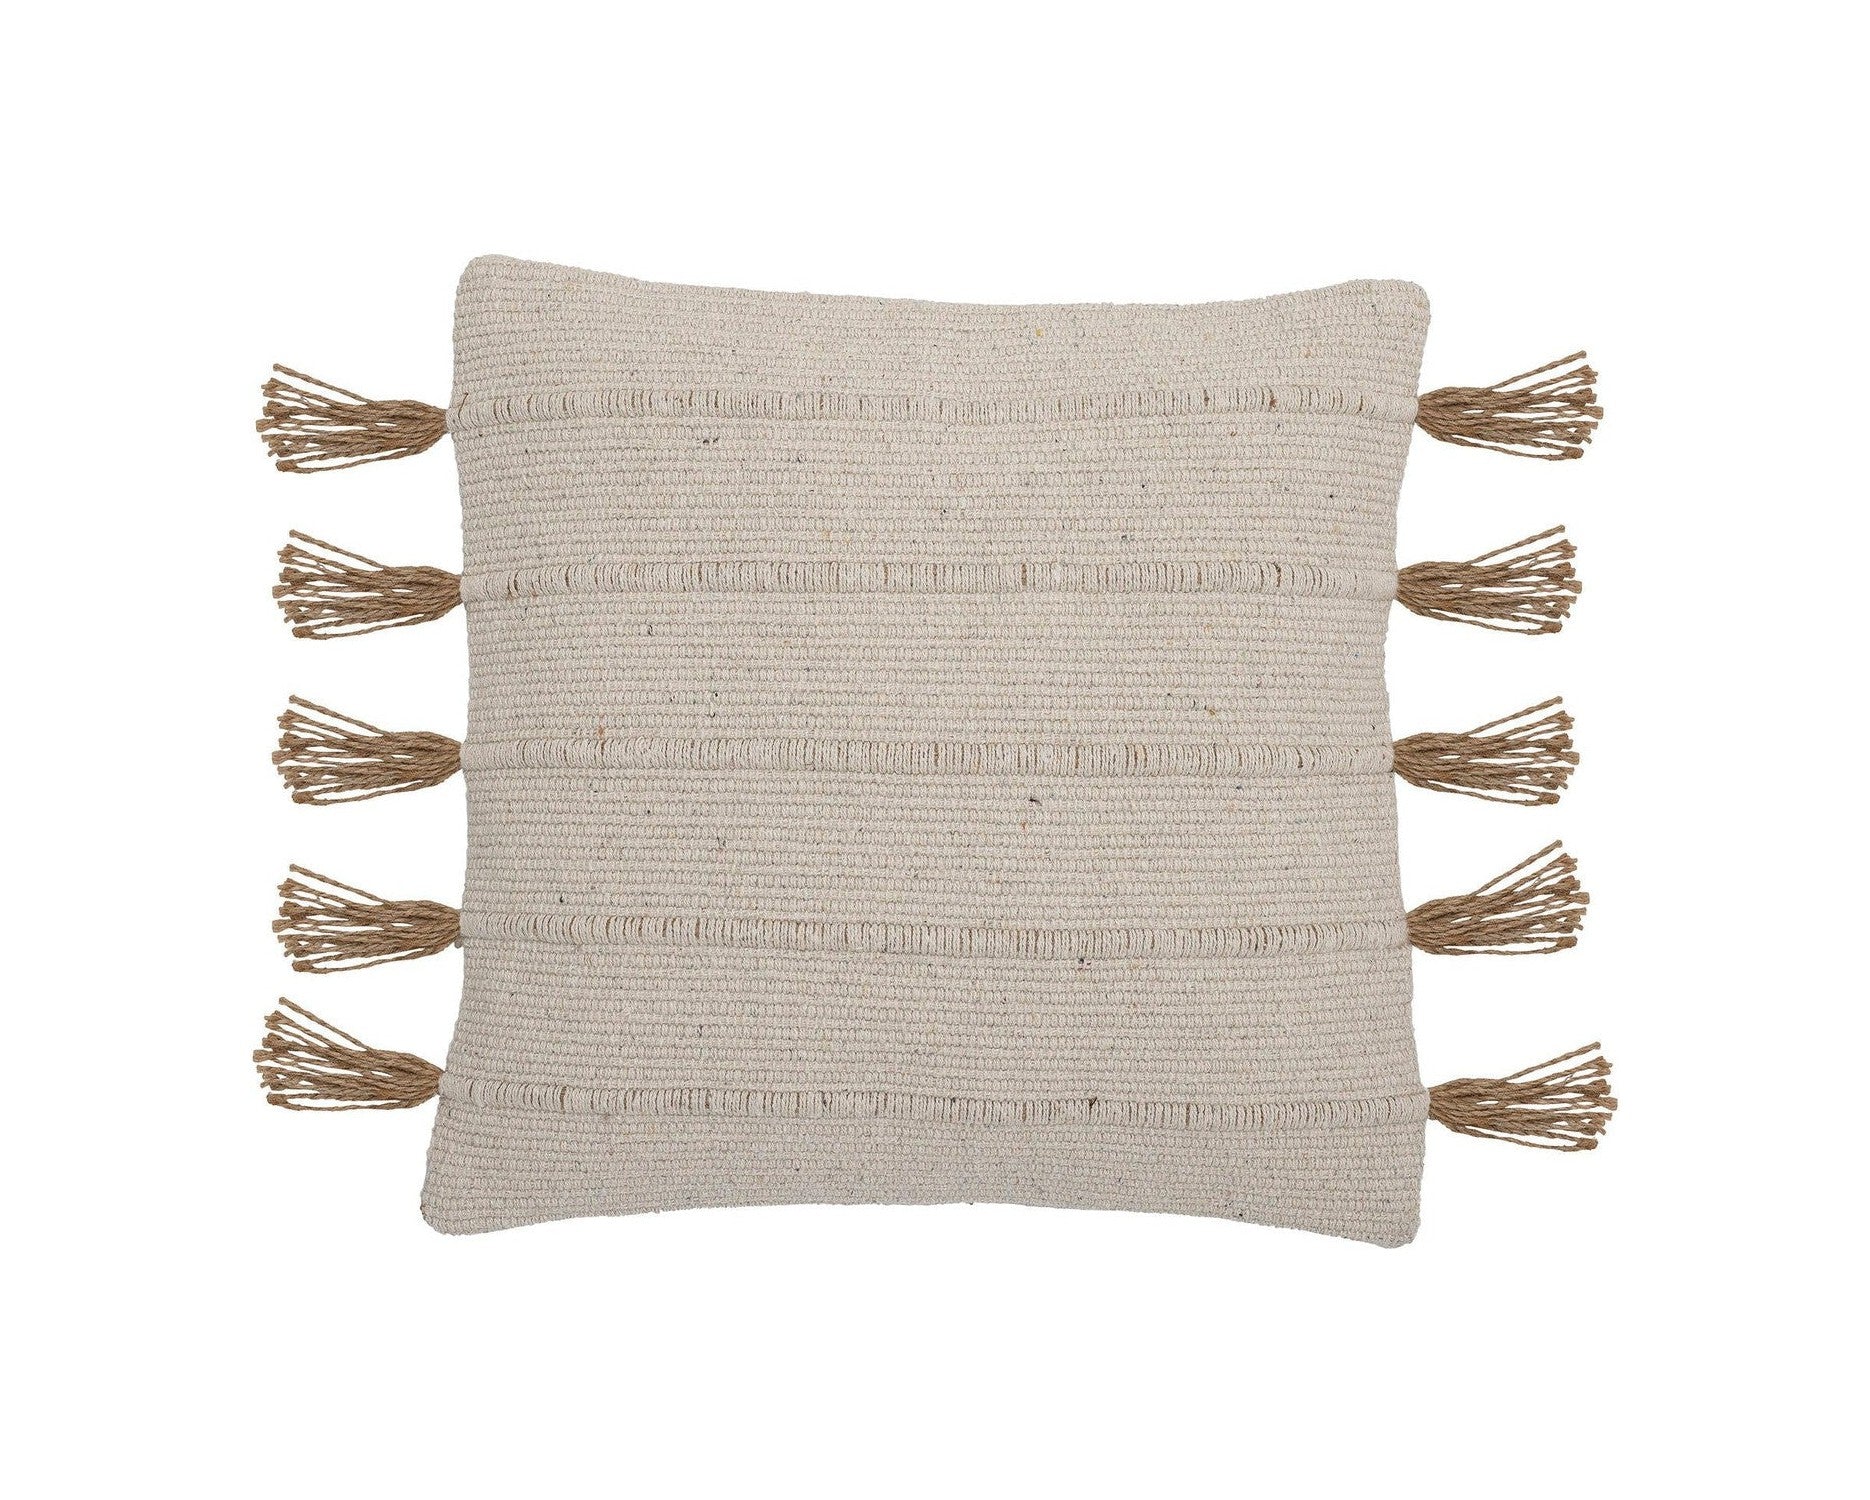 Creative Collection Ensar Cushion, Nature, Recycled Cotton